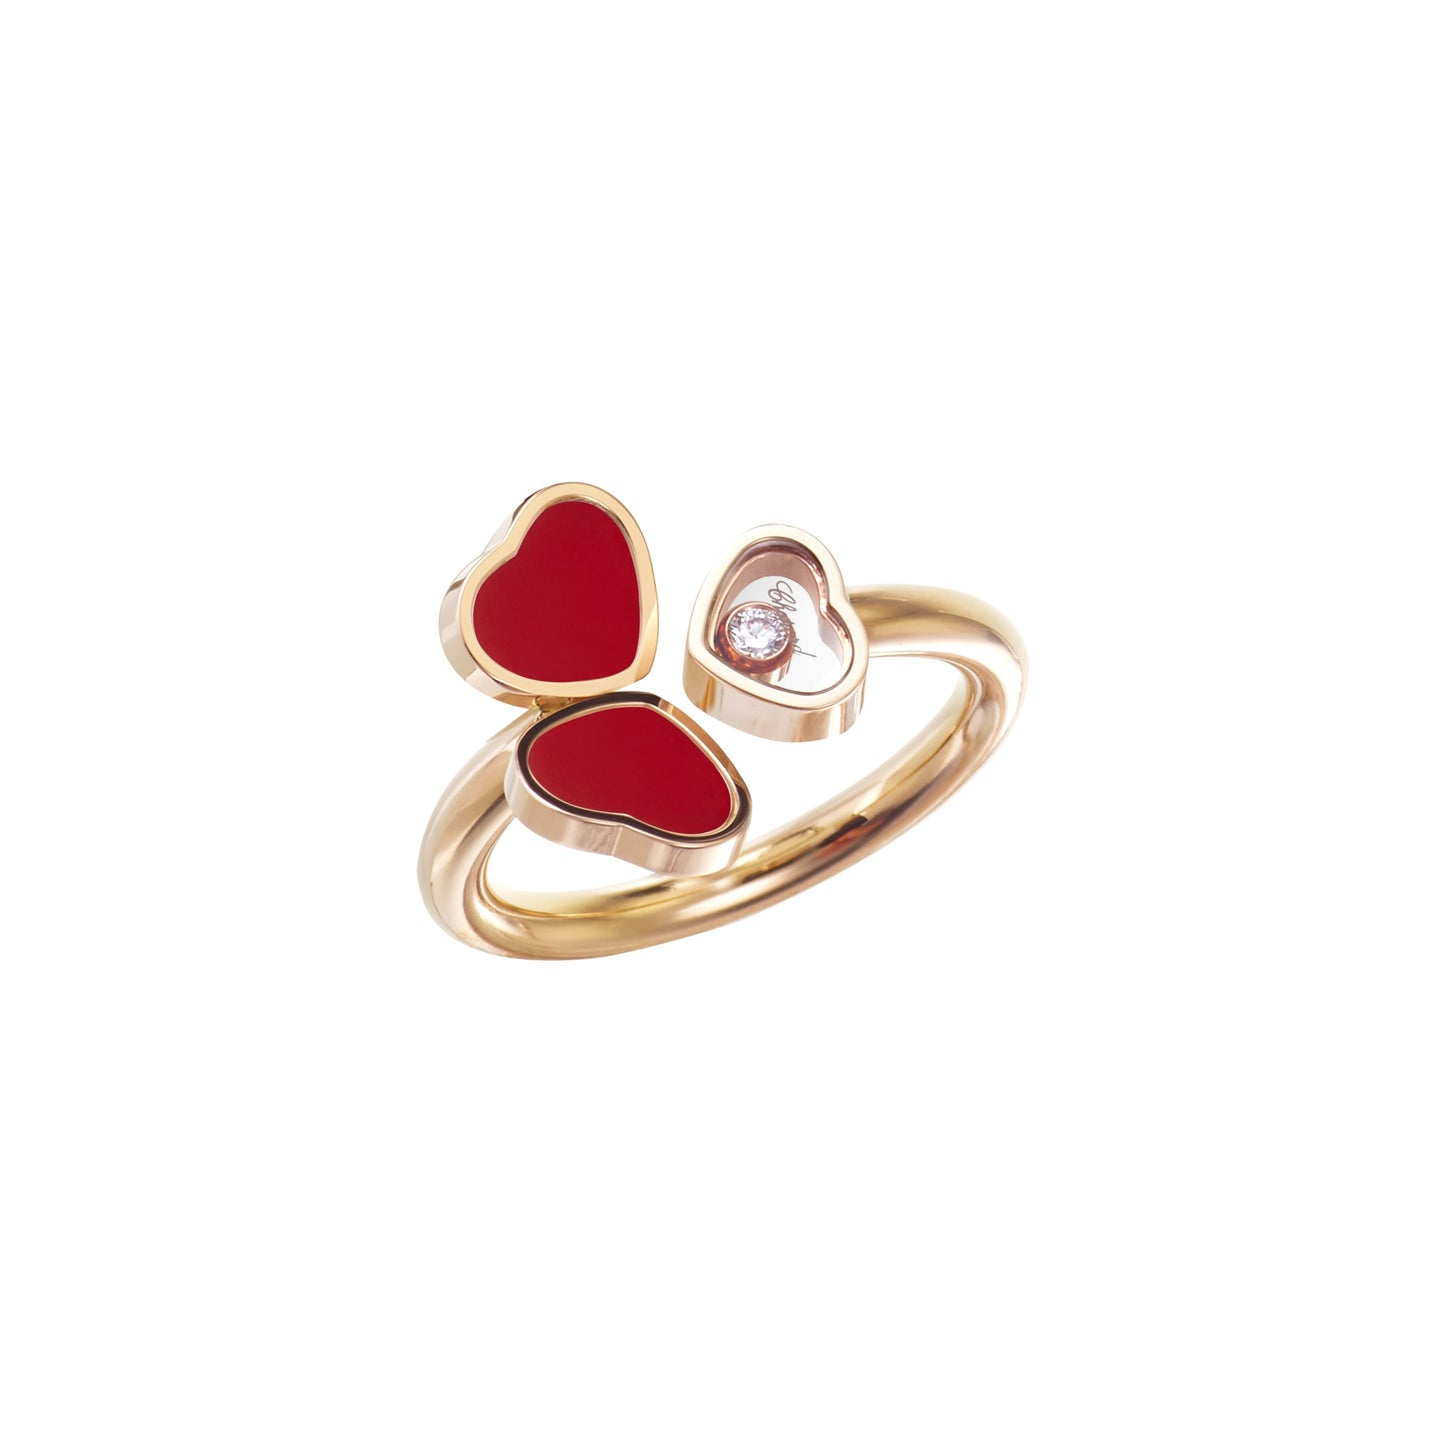 HAPPY HEARTS WINGS RING, ETHICAL ROSE GOLD, DIAMOND, RED STONE 82A083-5800